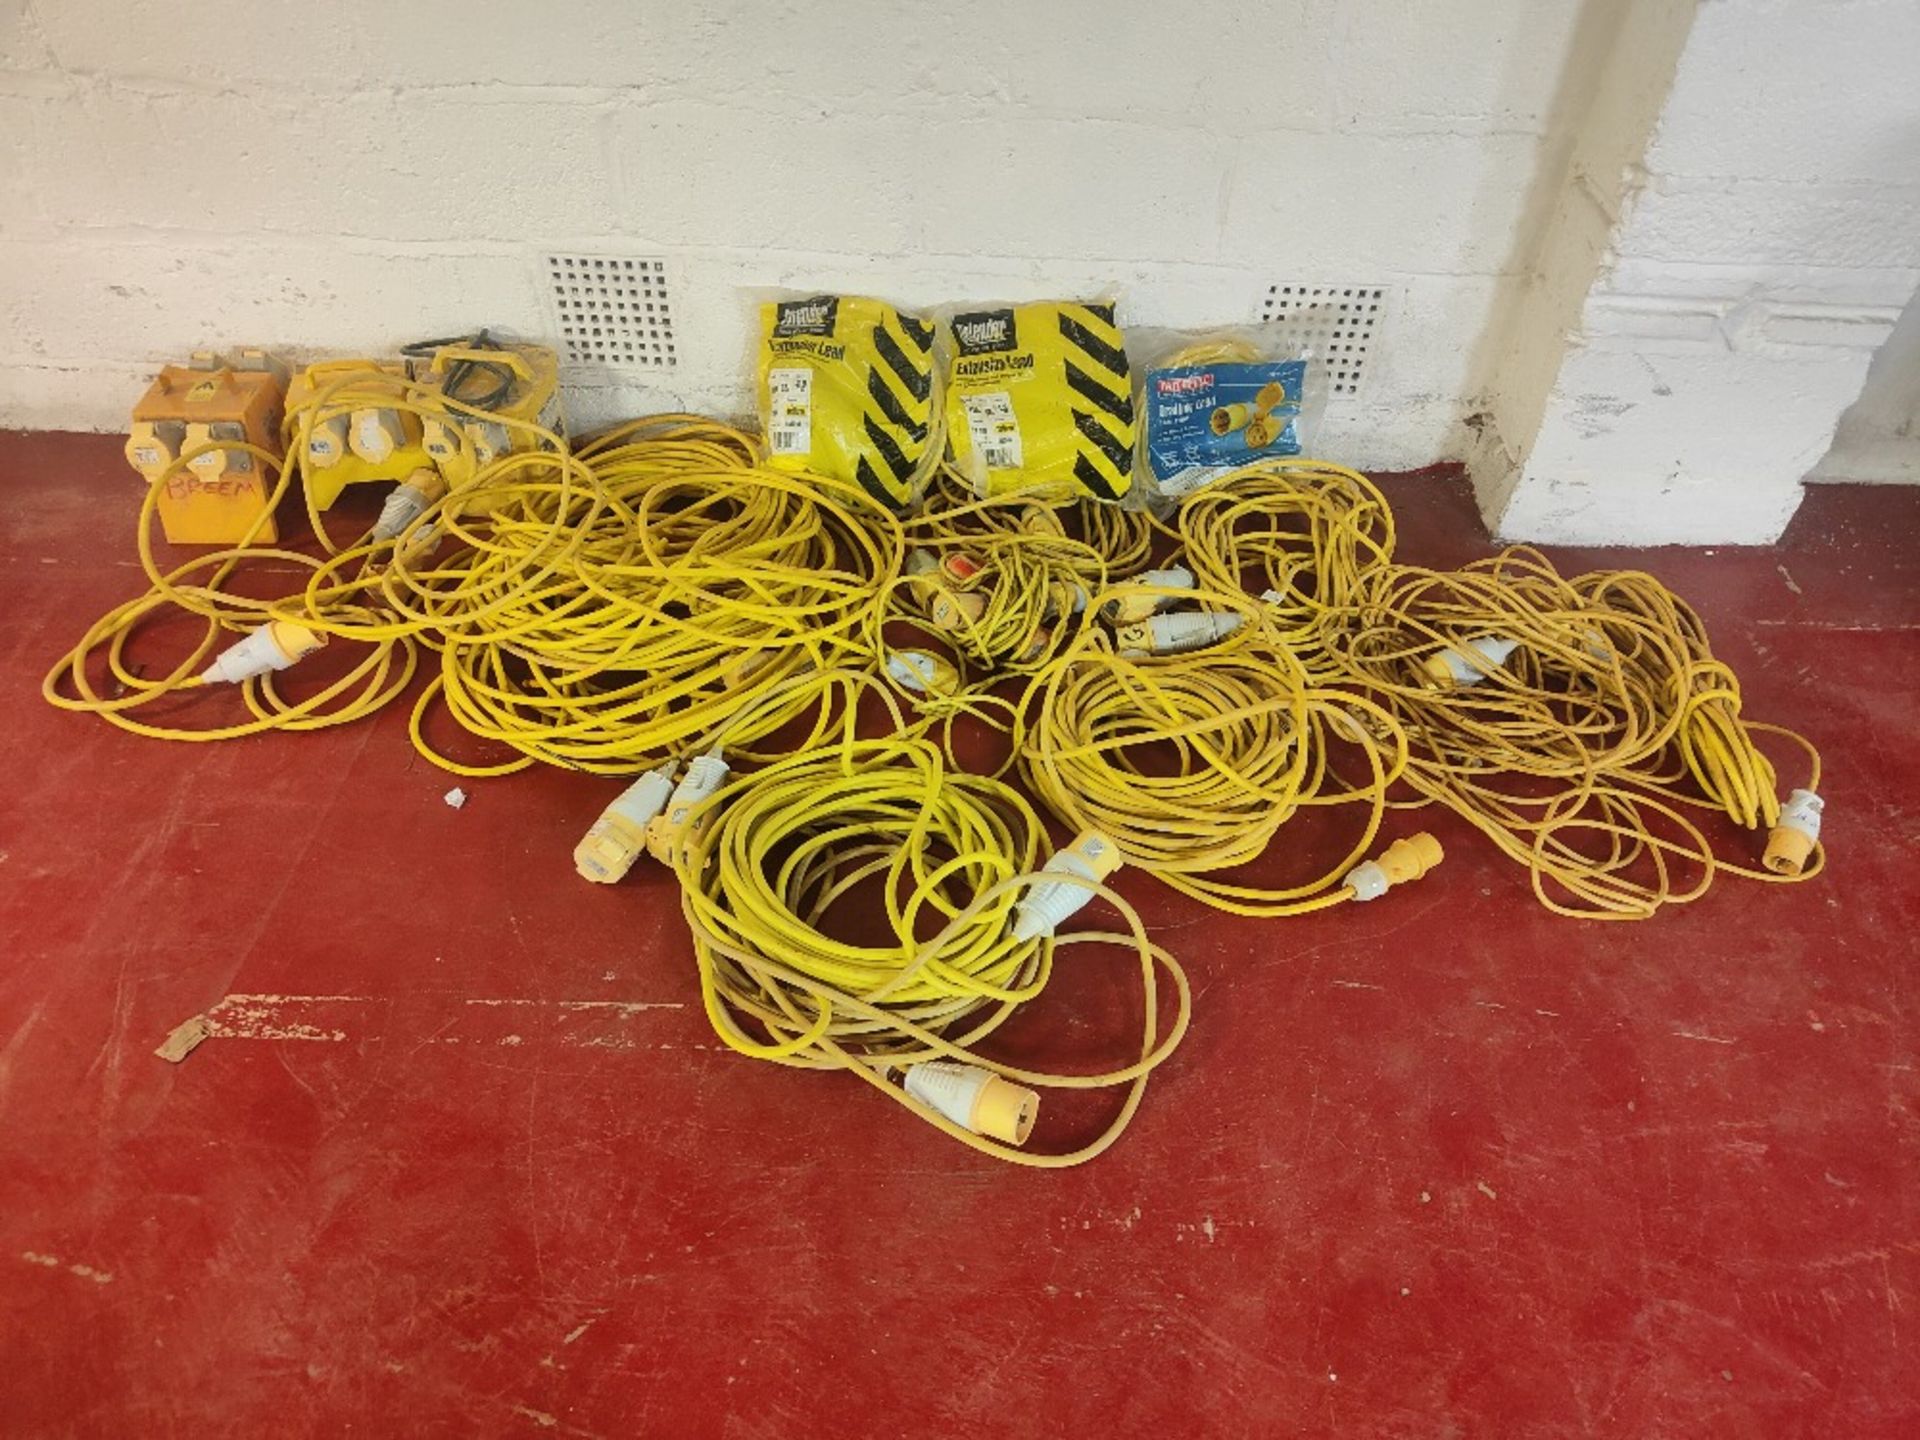 Quantity of 110V Electrical Cables and Splitters